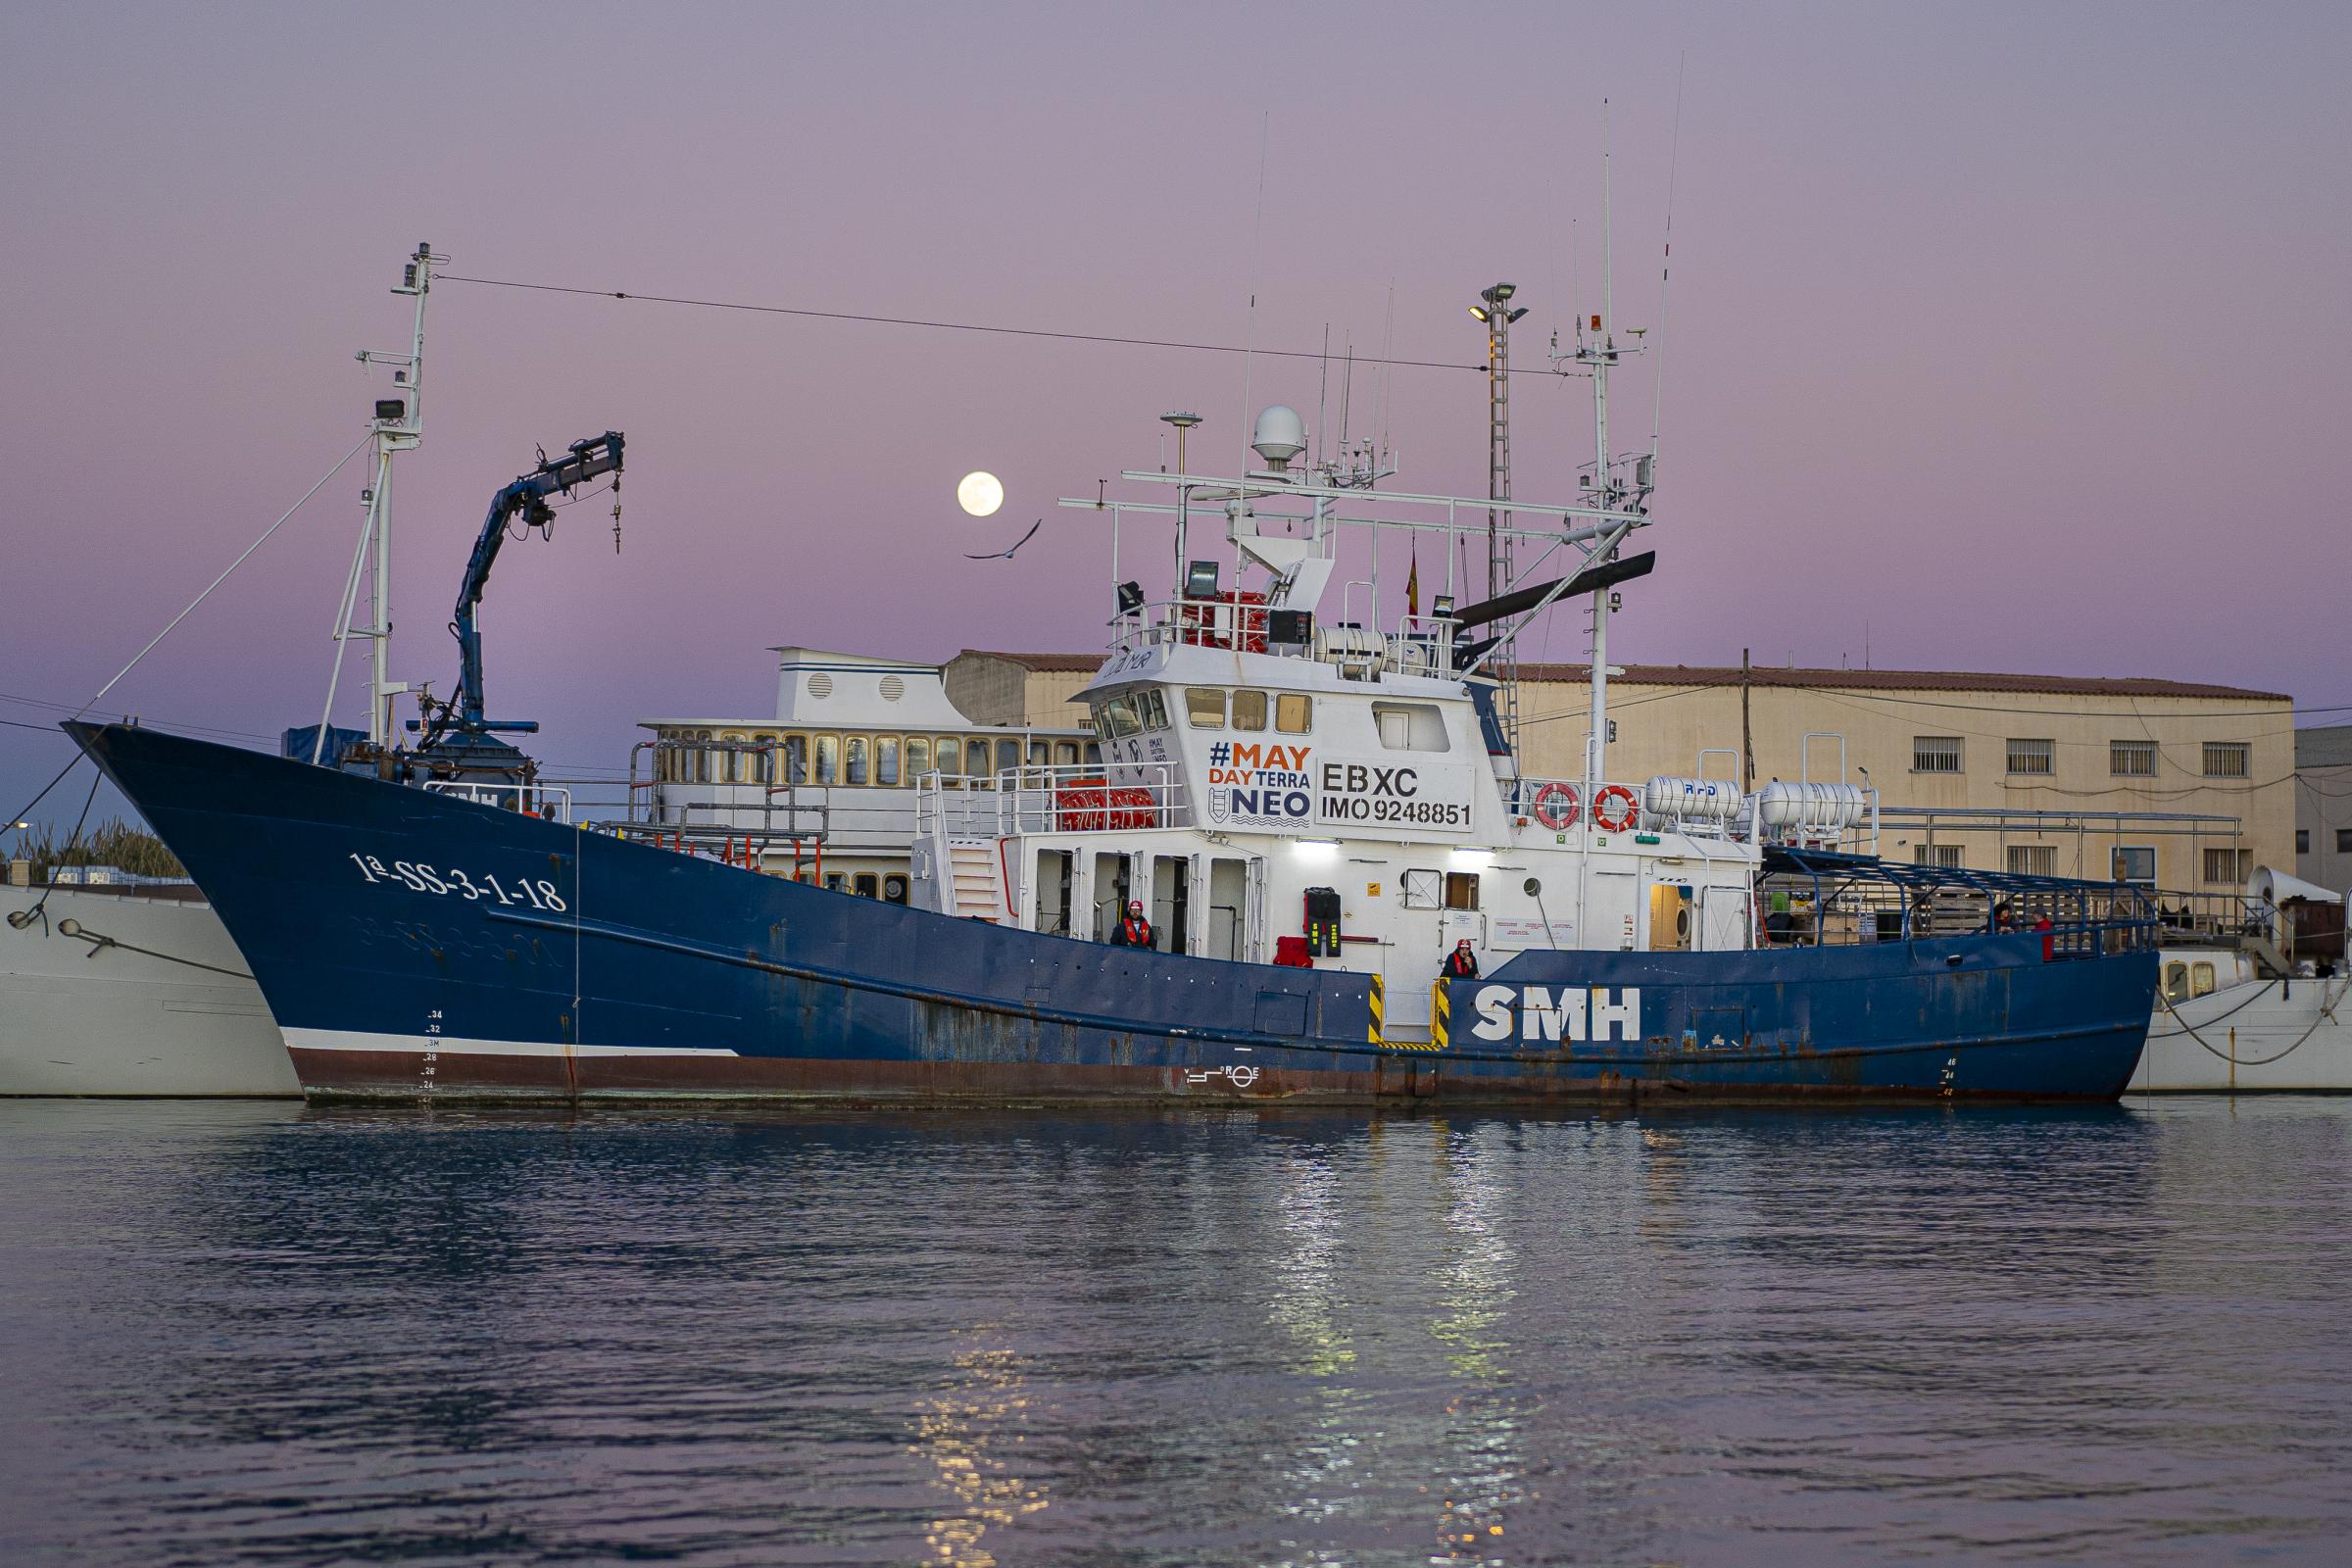  The Stella Maris Berria, a former Cantabrian tuna fishing boat, about to be scrapped, was...